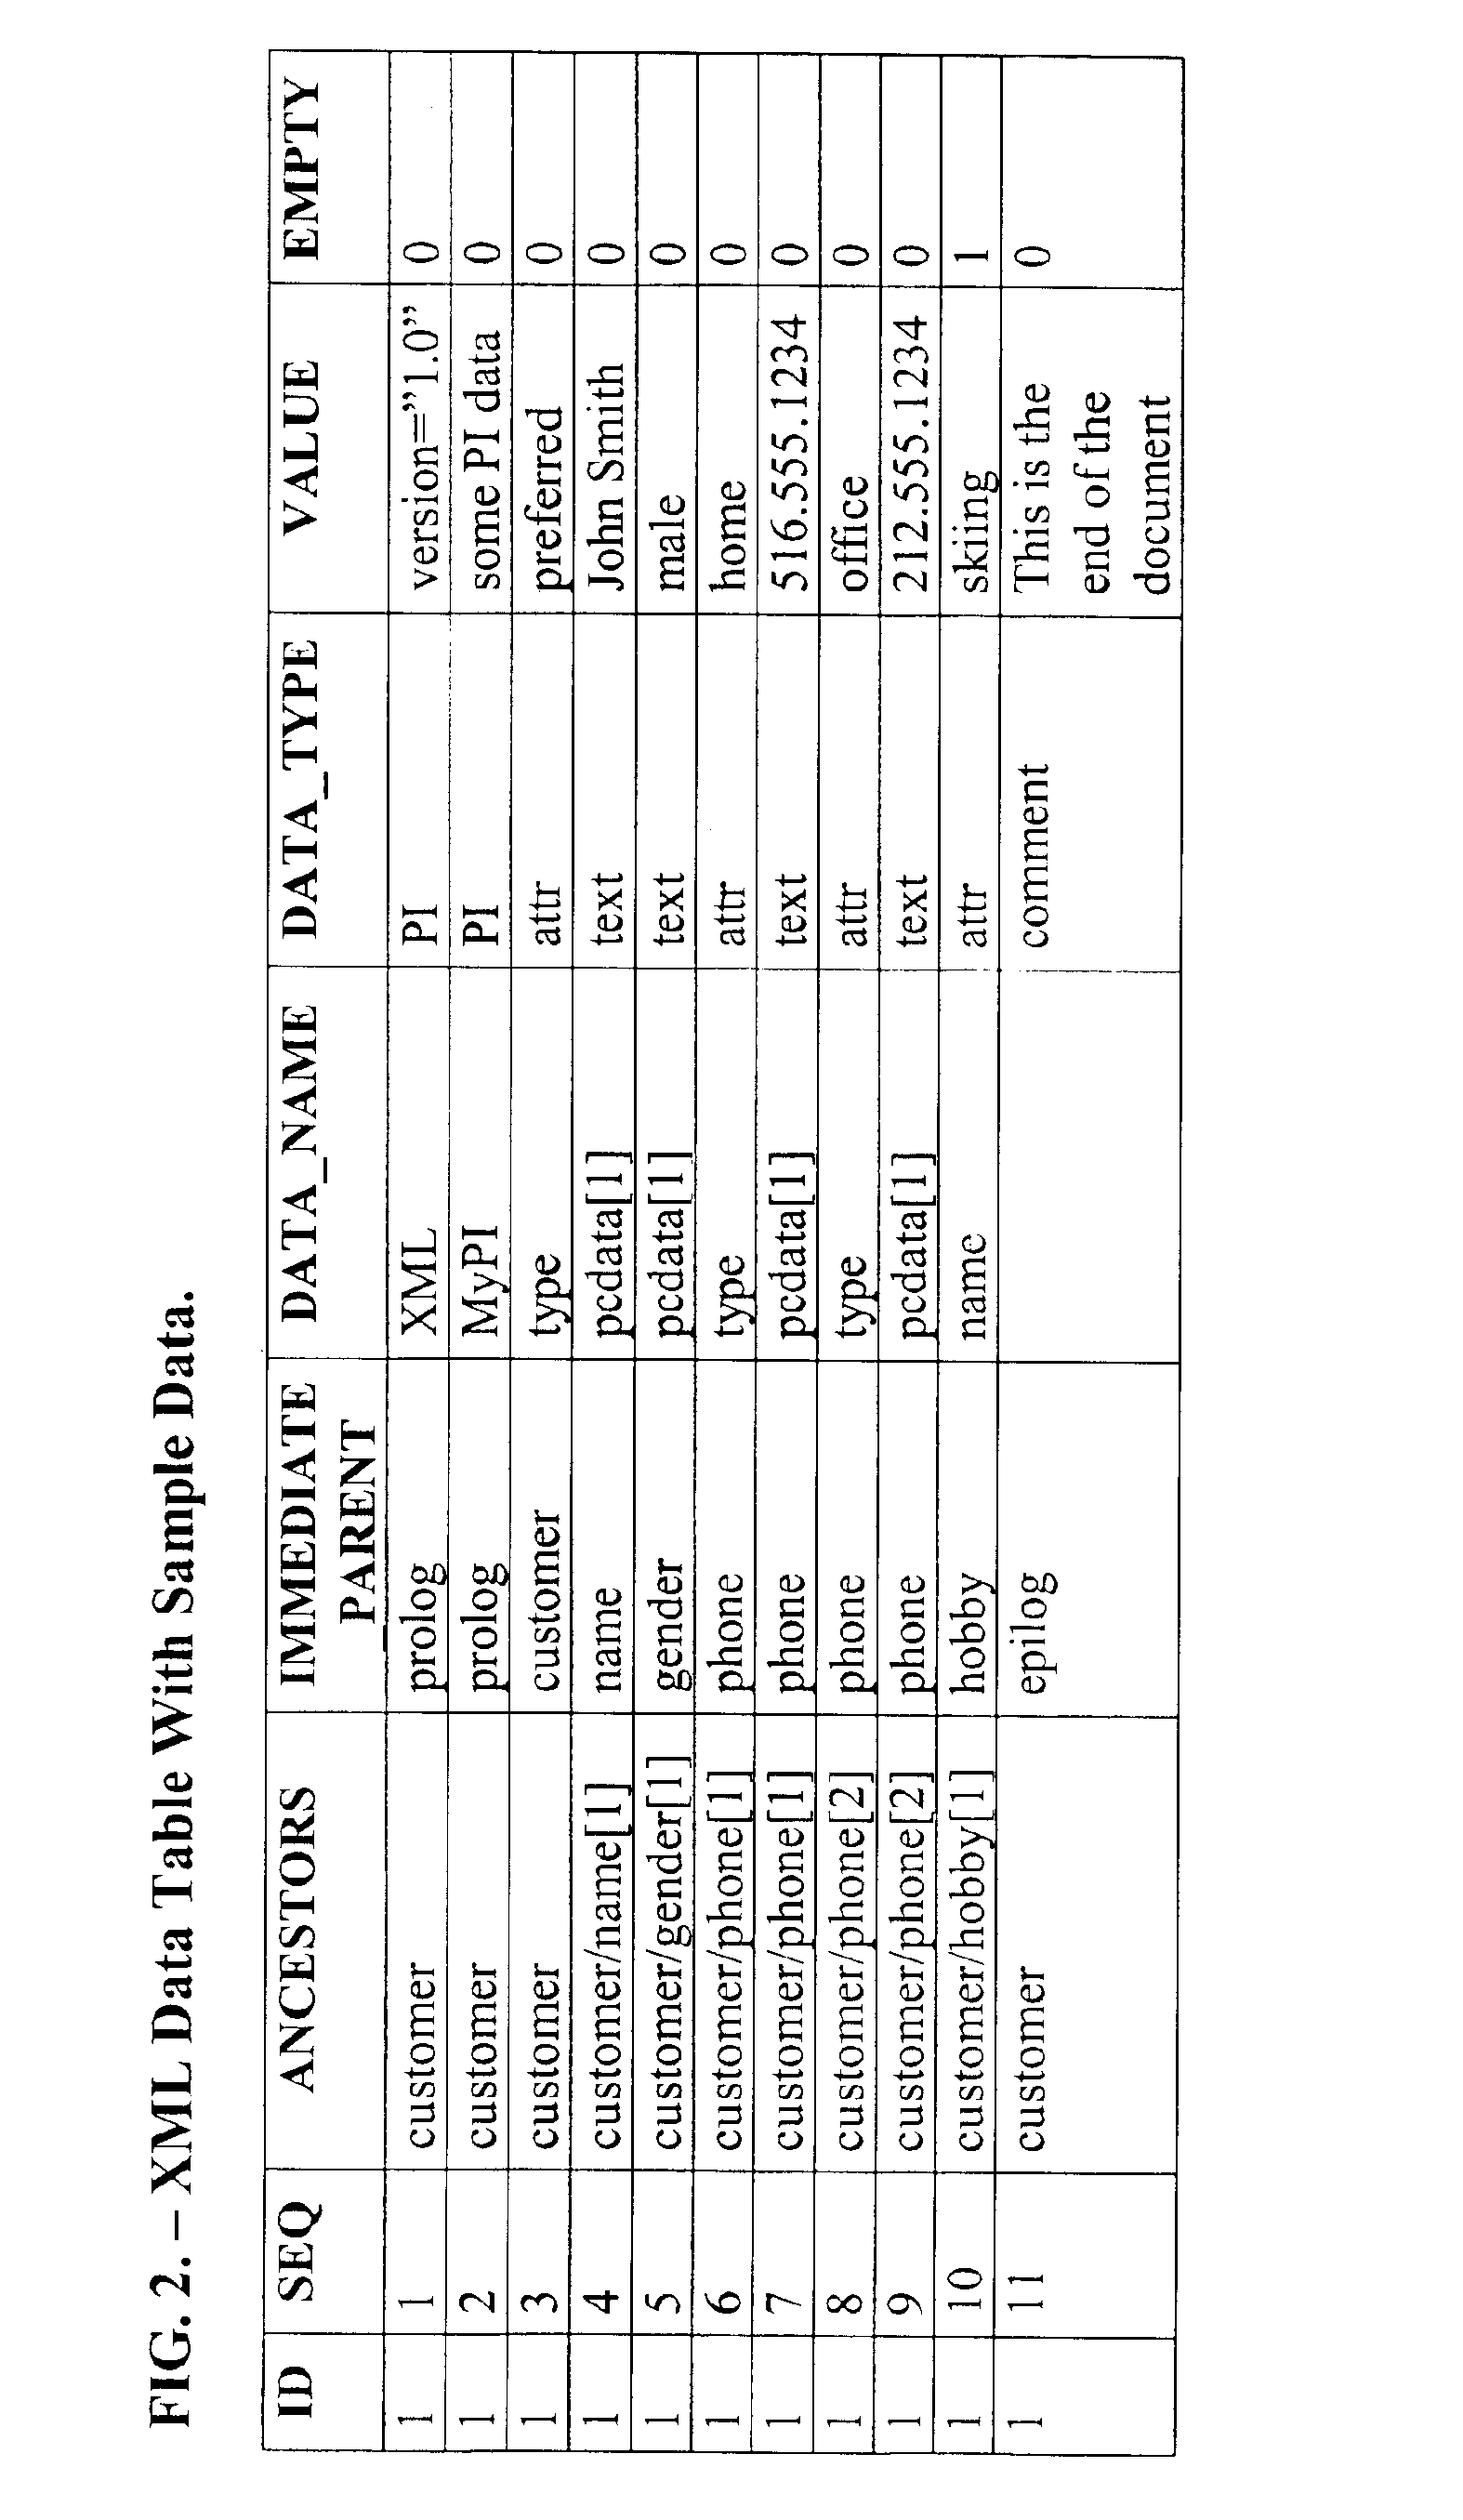 System and method for converting an XML data structure into a relational database